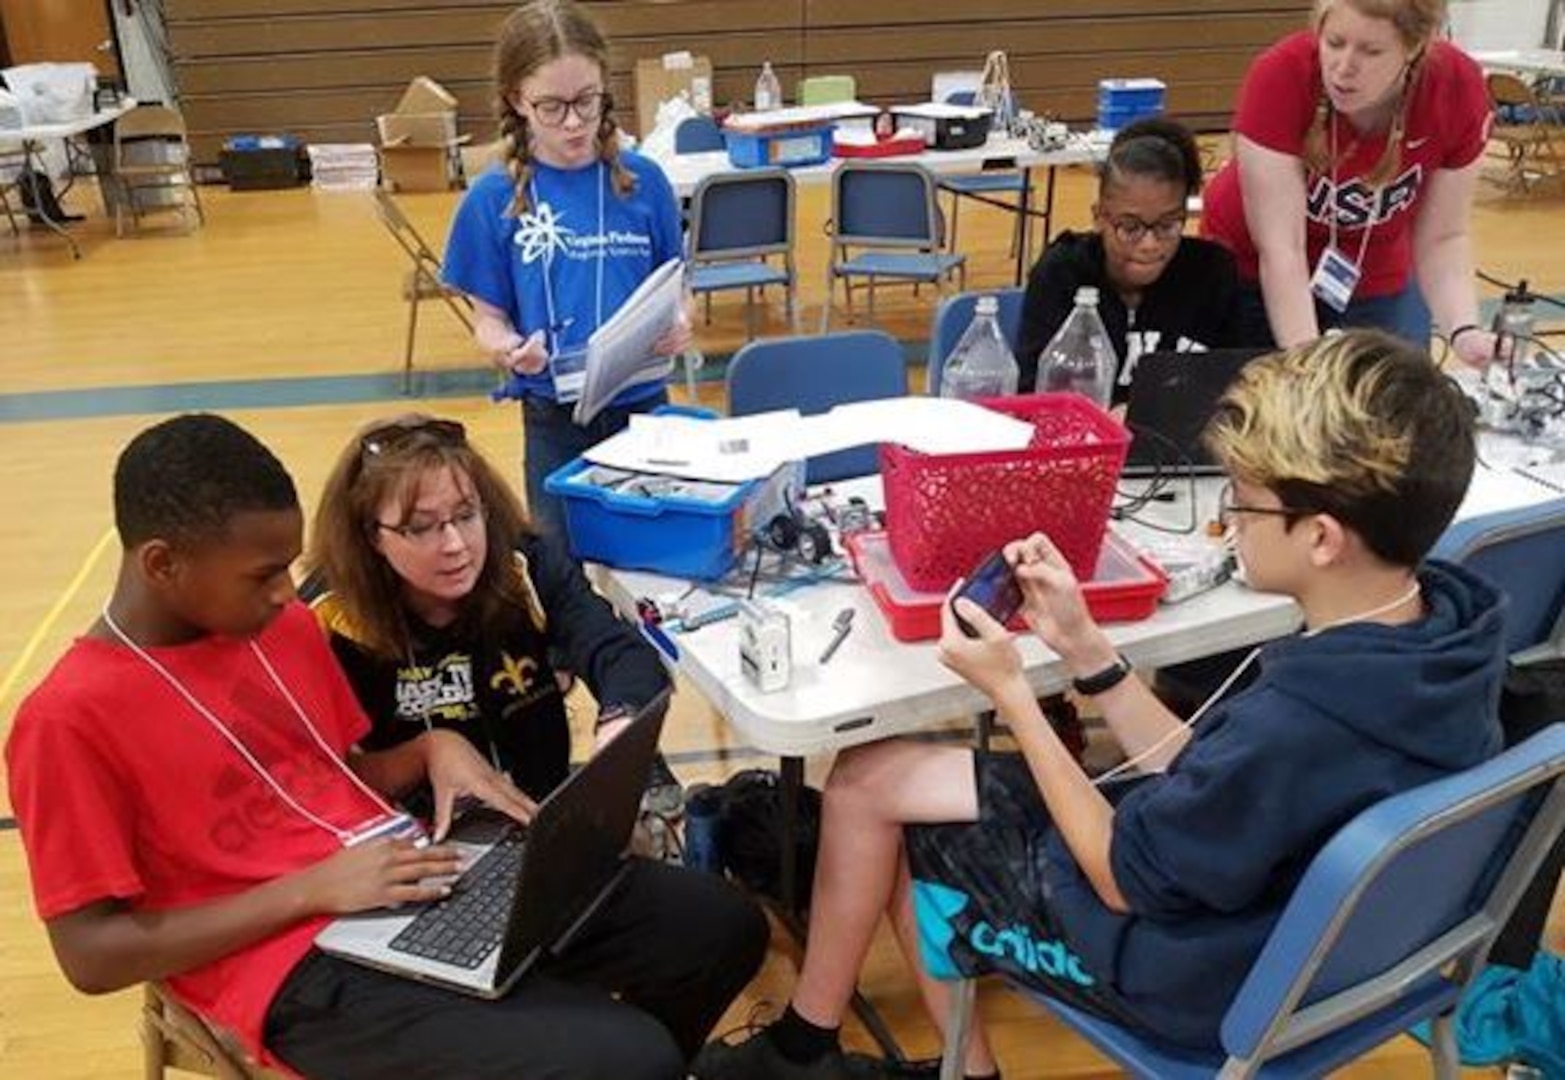 IMAGE:KING GEORGE. Va. (June 28, 2018) - Middle school students prepare for a science, technology, engineering and mathematics (STEM) activity at the 2018 STEM Summer Academy. The students briefed their mentors, teachers, and visitors on how they overcame a variety of Navy focused problems with STEM, creativity, communication, and teamwork throughout the week-long academy.